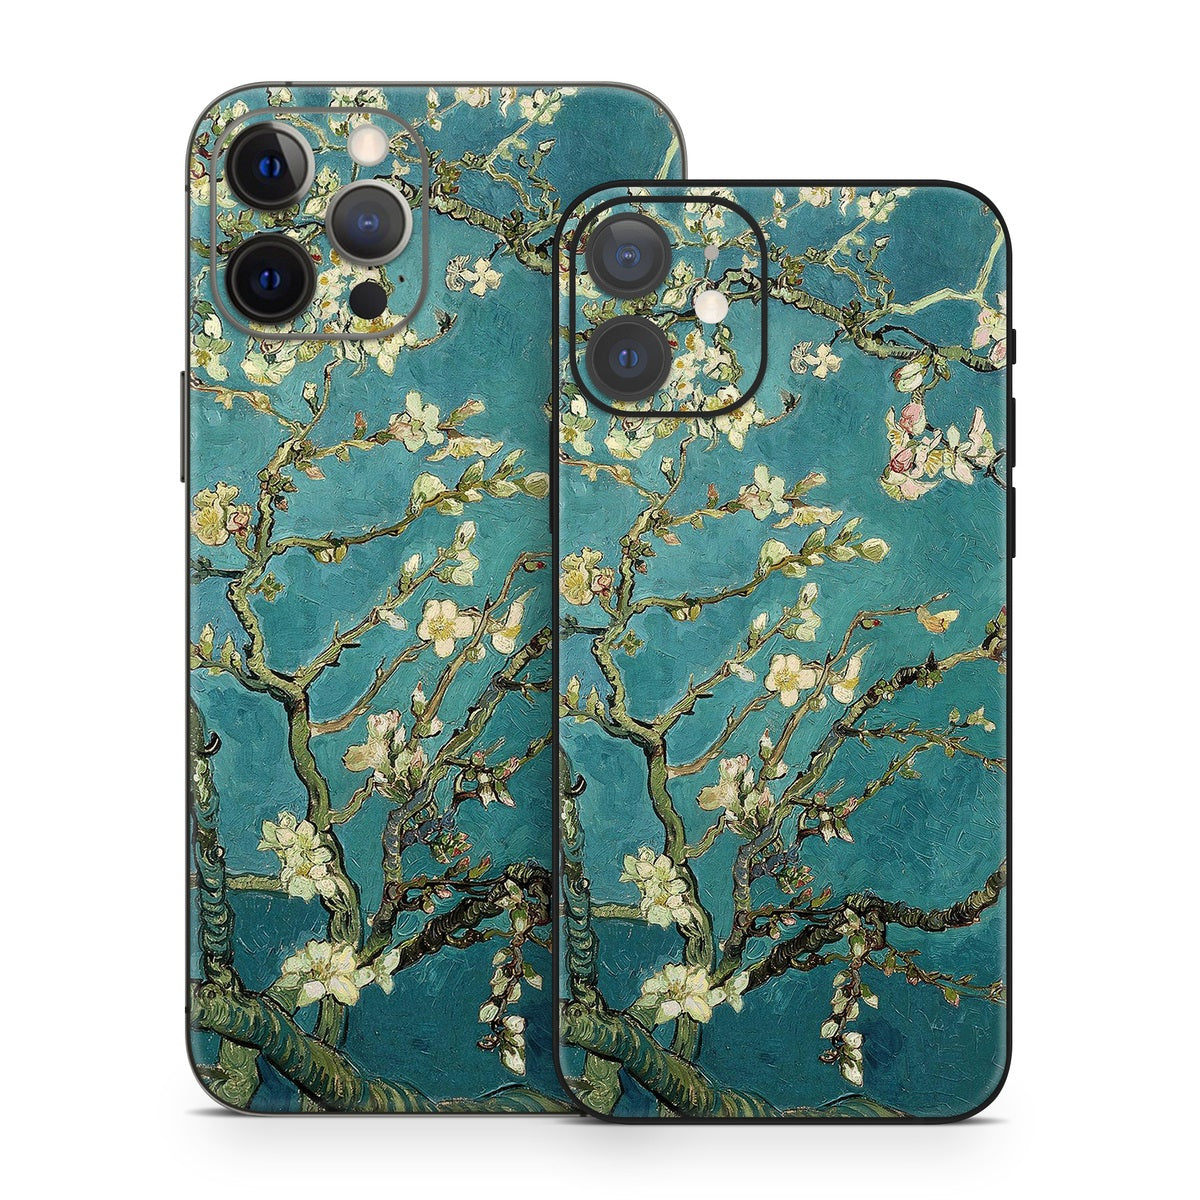 Blossoming Almond Tree - Apple iPhone 12 Skin